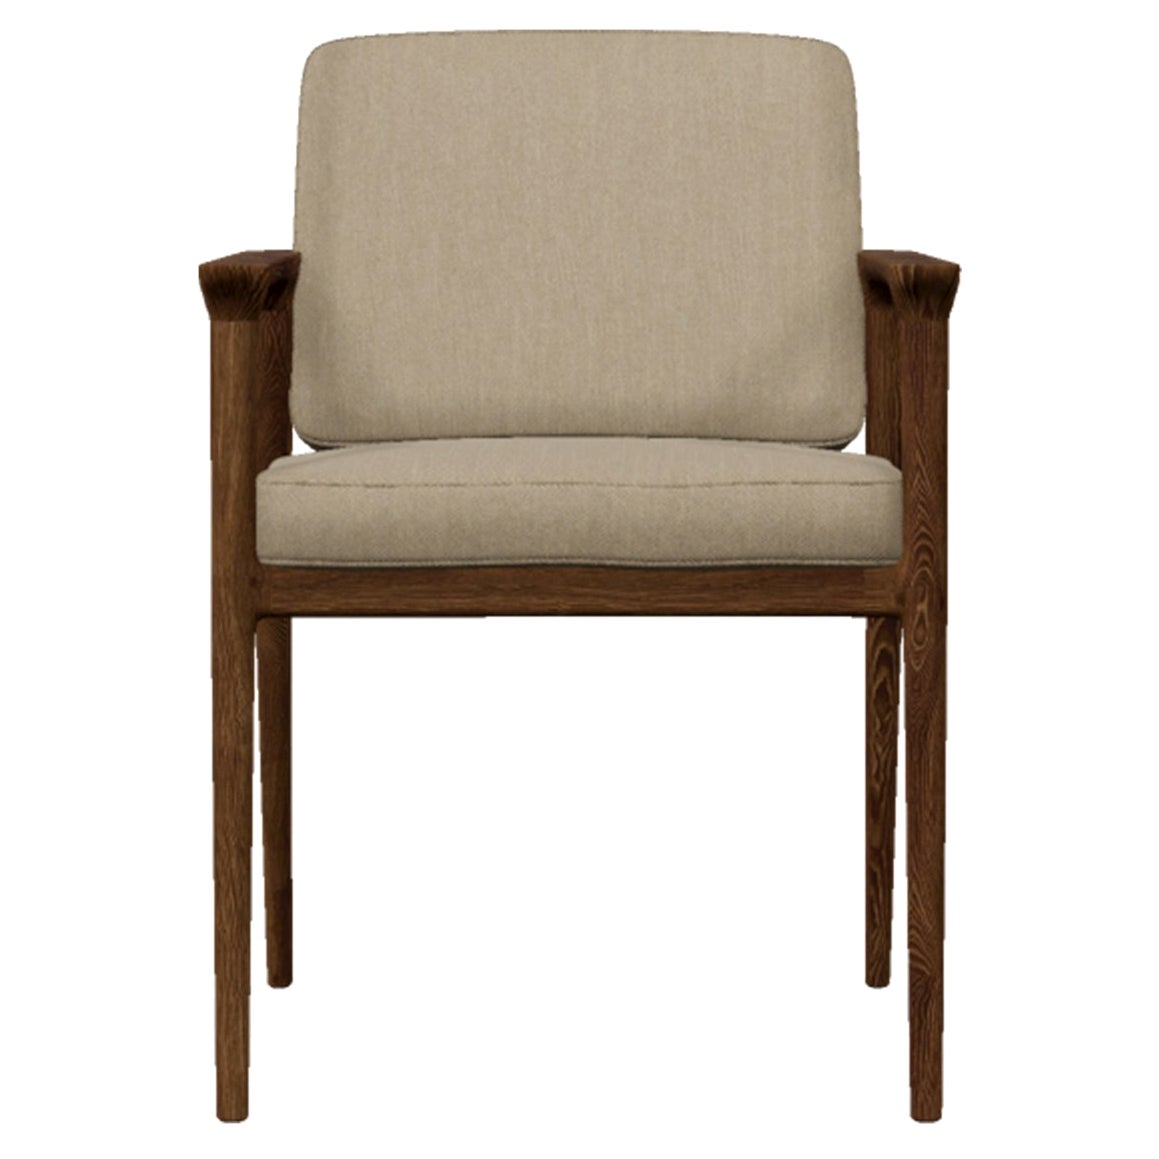 Moooi Zio Dining Chair in Oray Ronan Upholstery with Oak Stained Cinnamon Frame